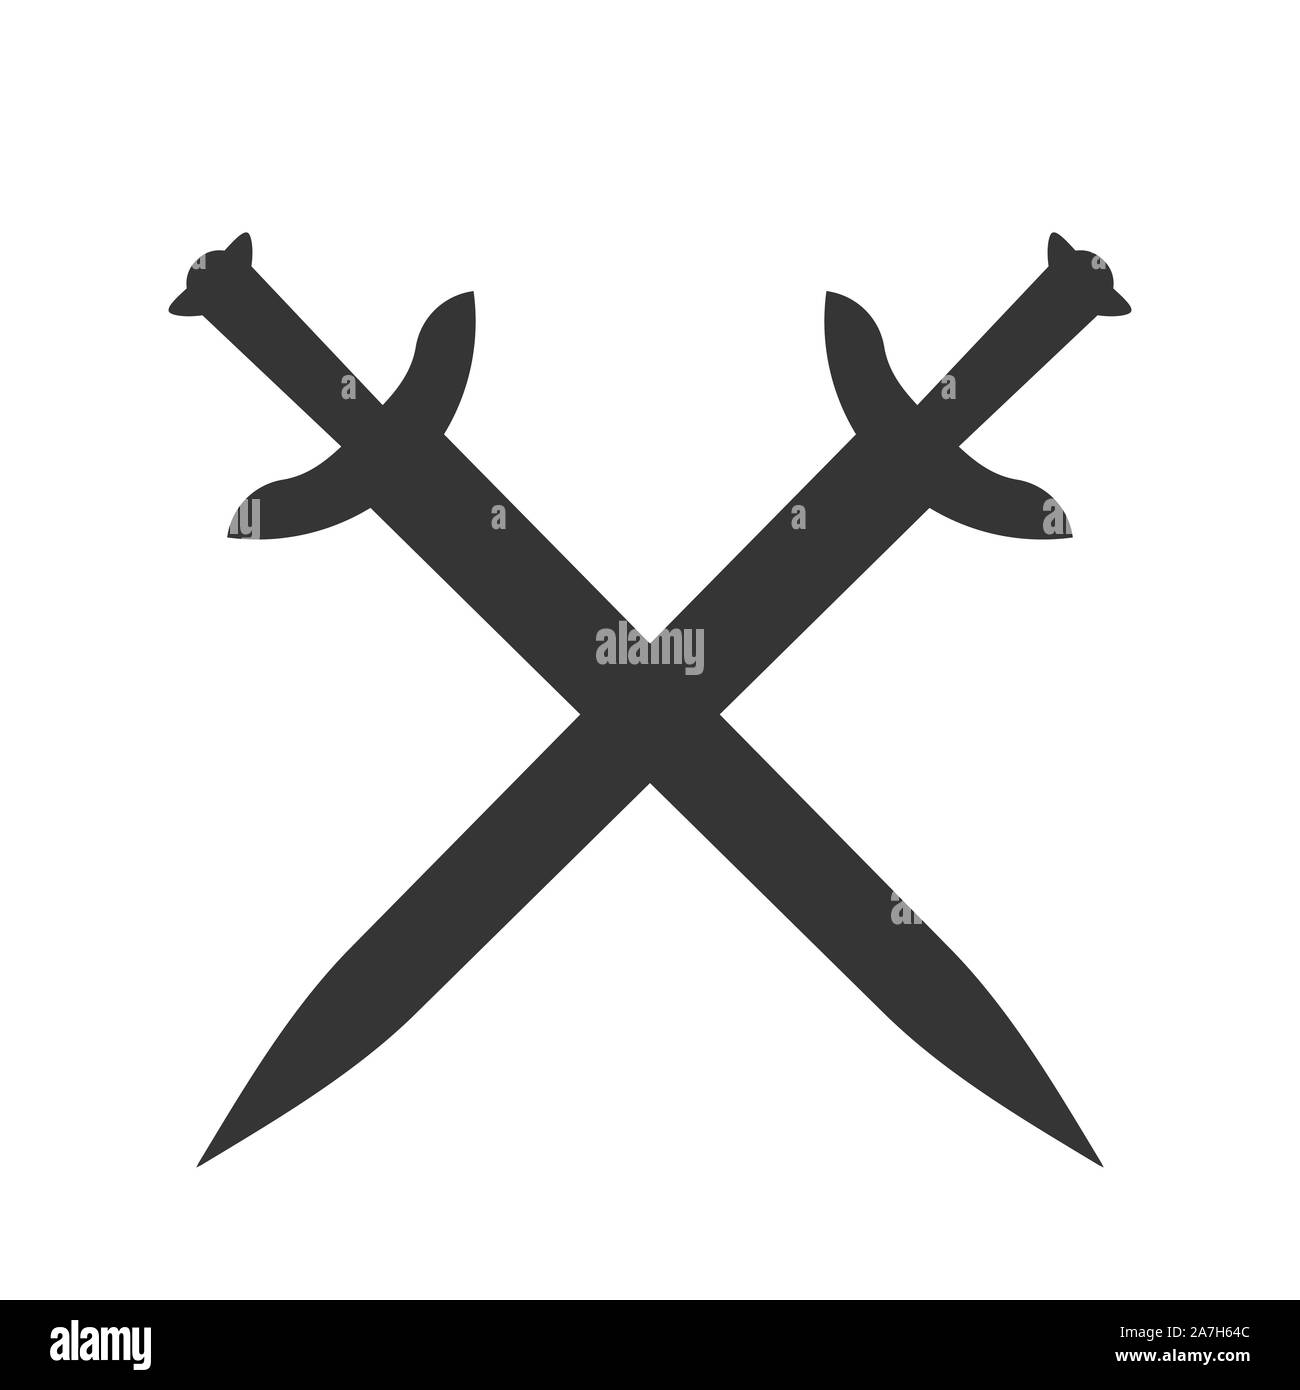 Two Medieval Knight Crossed Swords Isolated Vector Emblem Black And White  Illustration Stock Illustration - Download Image Now - iStock